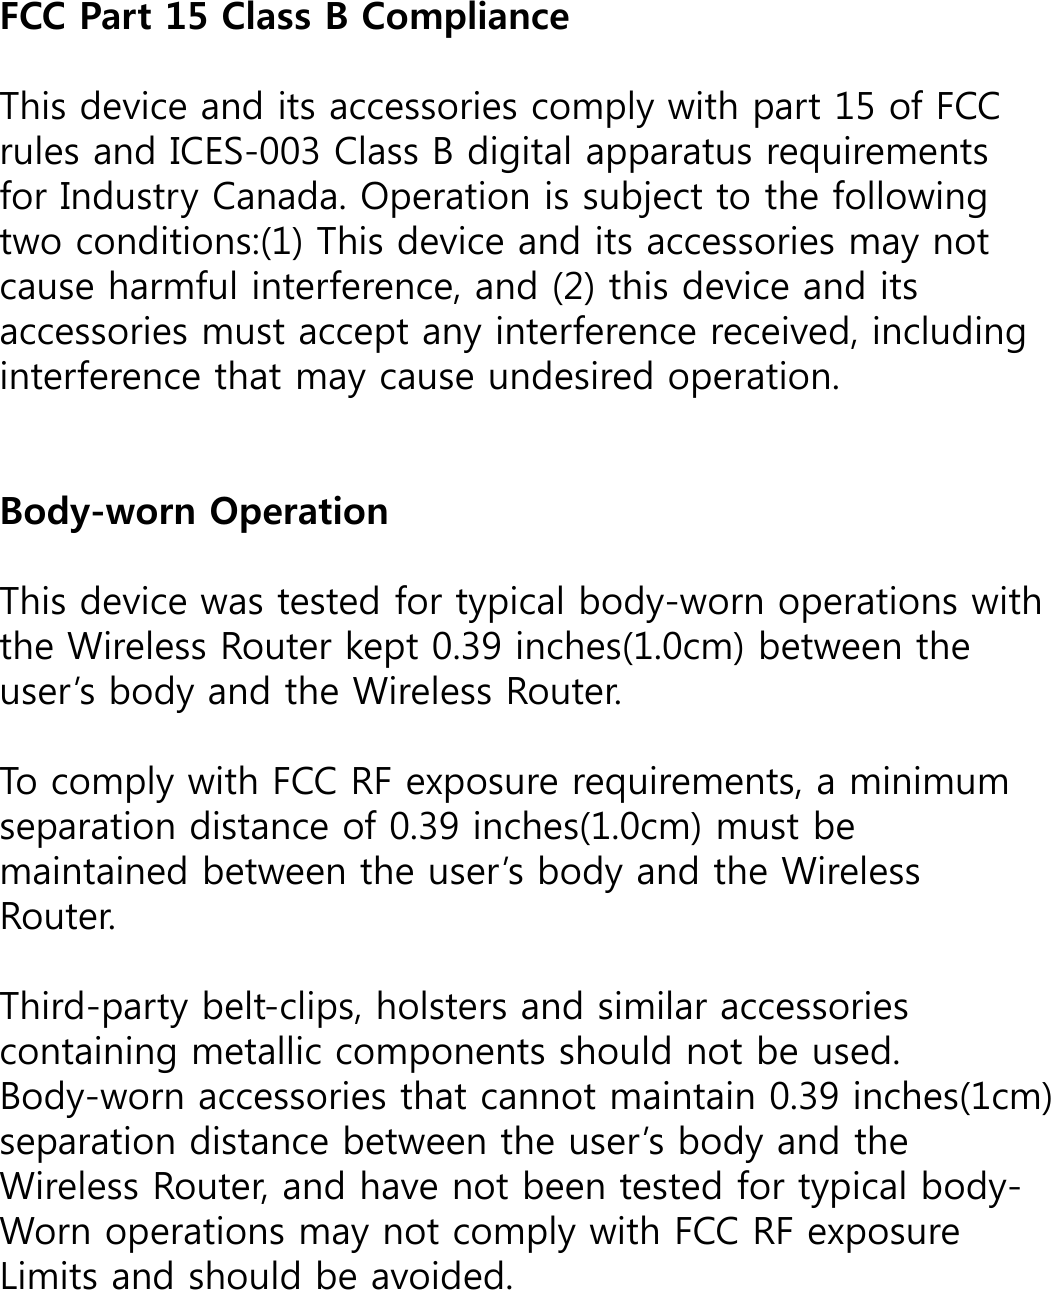 FCC Part 15 Class B Compliance This device and its accessories comply with part 15 of FCC rules and ICES-003 Class B digital apparatus requirements for Industry Canada. Operation is subject to the following two conditions:(1) This device and its accessories may not cause harmful interference, and (2) this device and its accessories must accept any interference received, including interference that may cause undesired operation. Body-worn Operation This device was tested for typical body-worn operations with the Wireless Router kept 0.39 inches(1.0cm) between the user’s body and the Wireless Router.To comply with FCC RF exposure requirements, a minimum separation distance of 0.39 inches(1.0cm) must be maintained between the user’s body and the WirelessRouter.Third-party belt-clips, holsters and similar accessories containing metallic components should not be used.  Body-worn accessories that cannot maintain 0.39 inches(1cm) separation distance between the user’s body and the Wireless Router, and have not been tested for typical body-Worn operations may not comply with FCC RF exposureLimits and should be avoided.